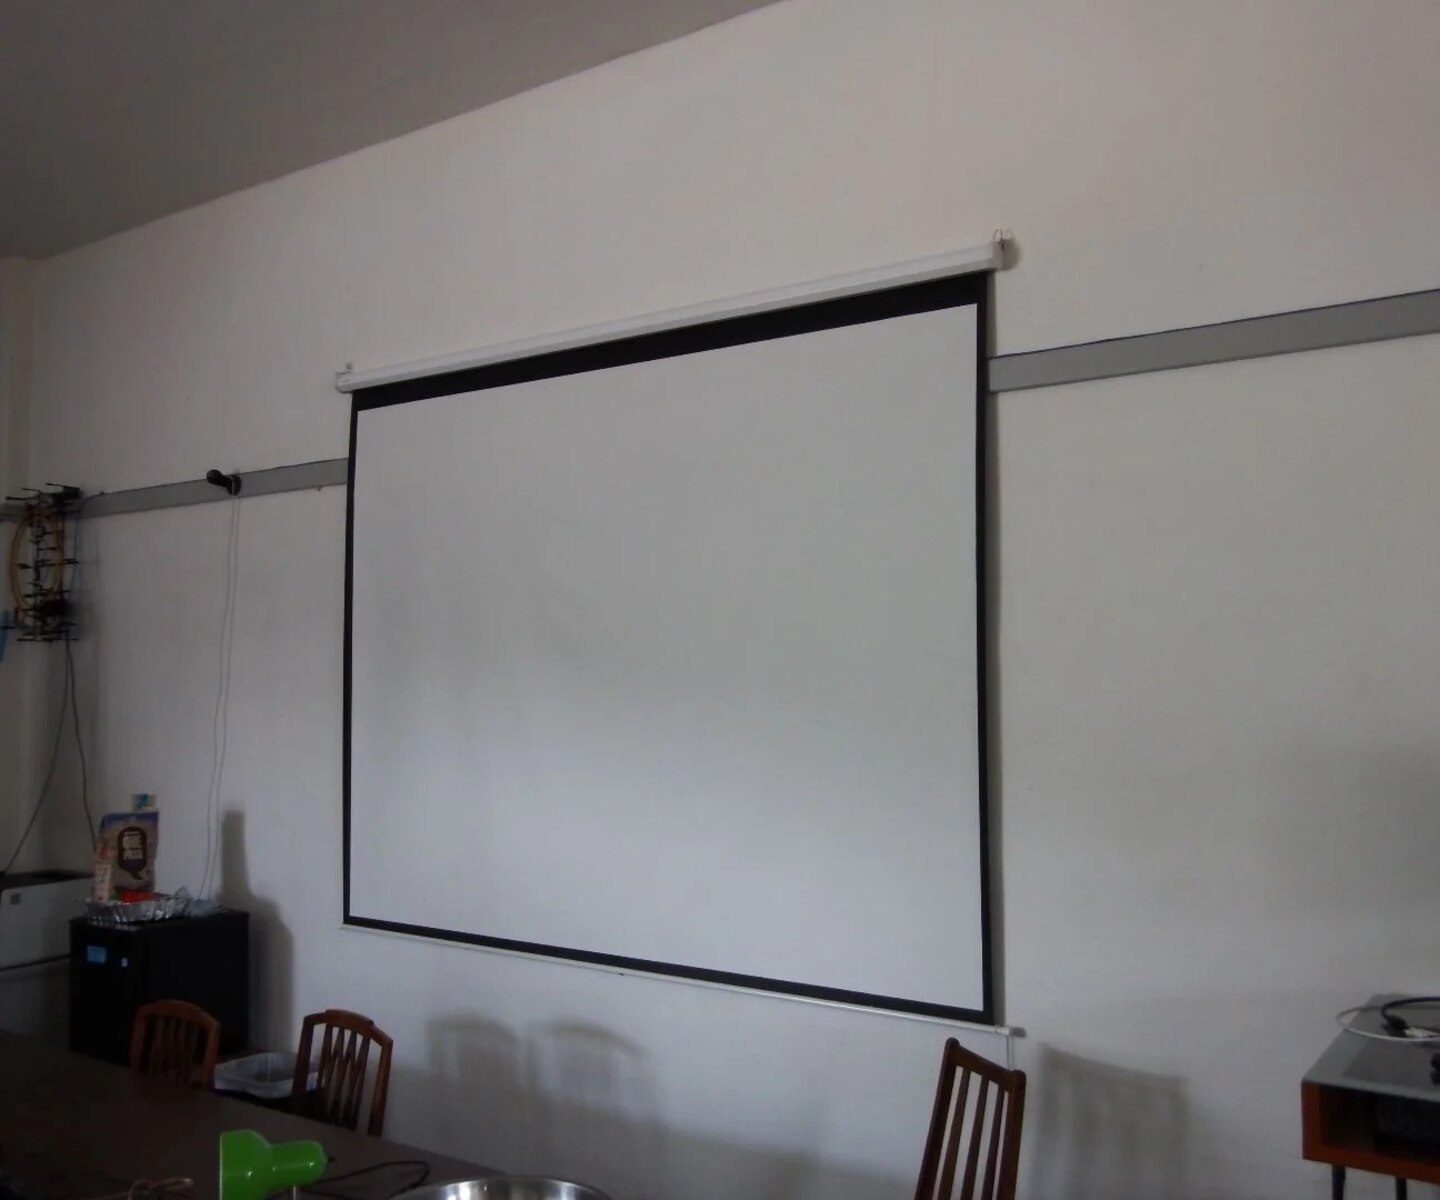 How To Paint A Wall Mural With A Projector